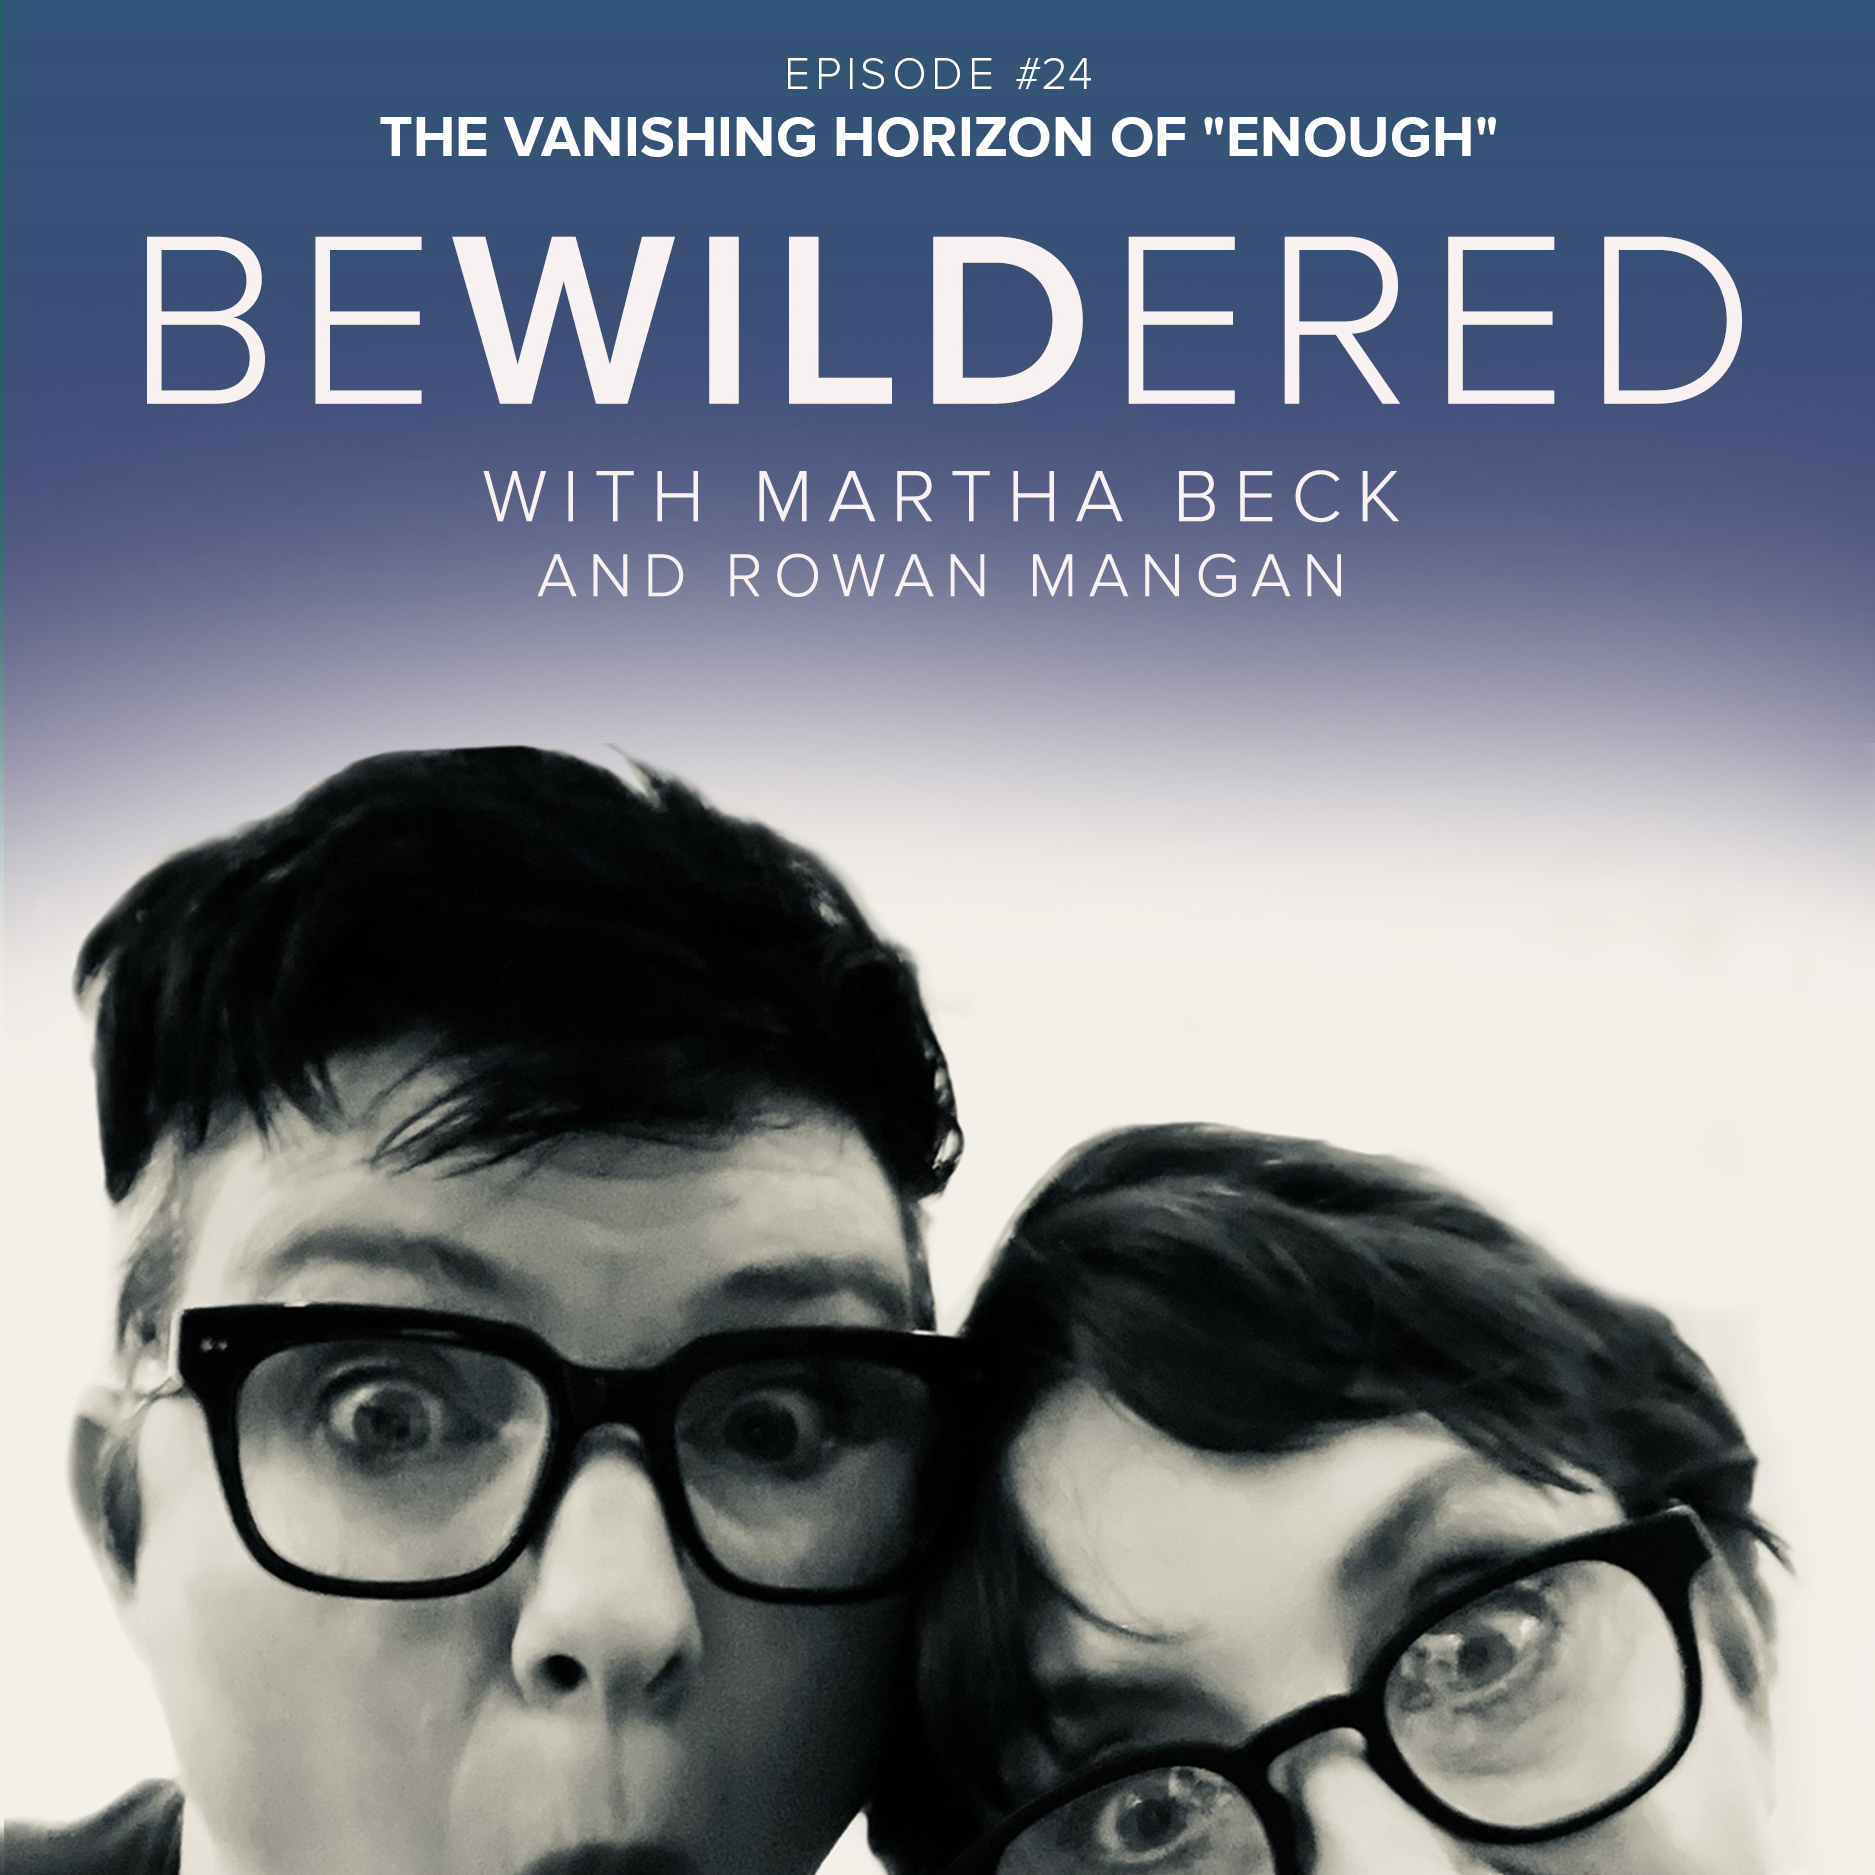 Image for Episode #24 The Vanishing Horizon of “Enough” for the Bewildered Podcast with Martha Beck and Rowan Mangan